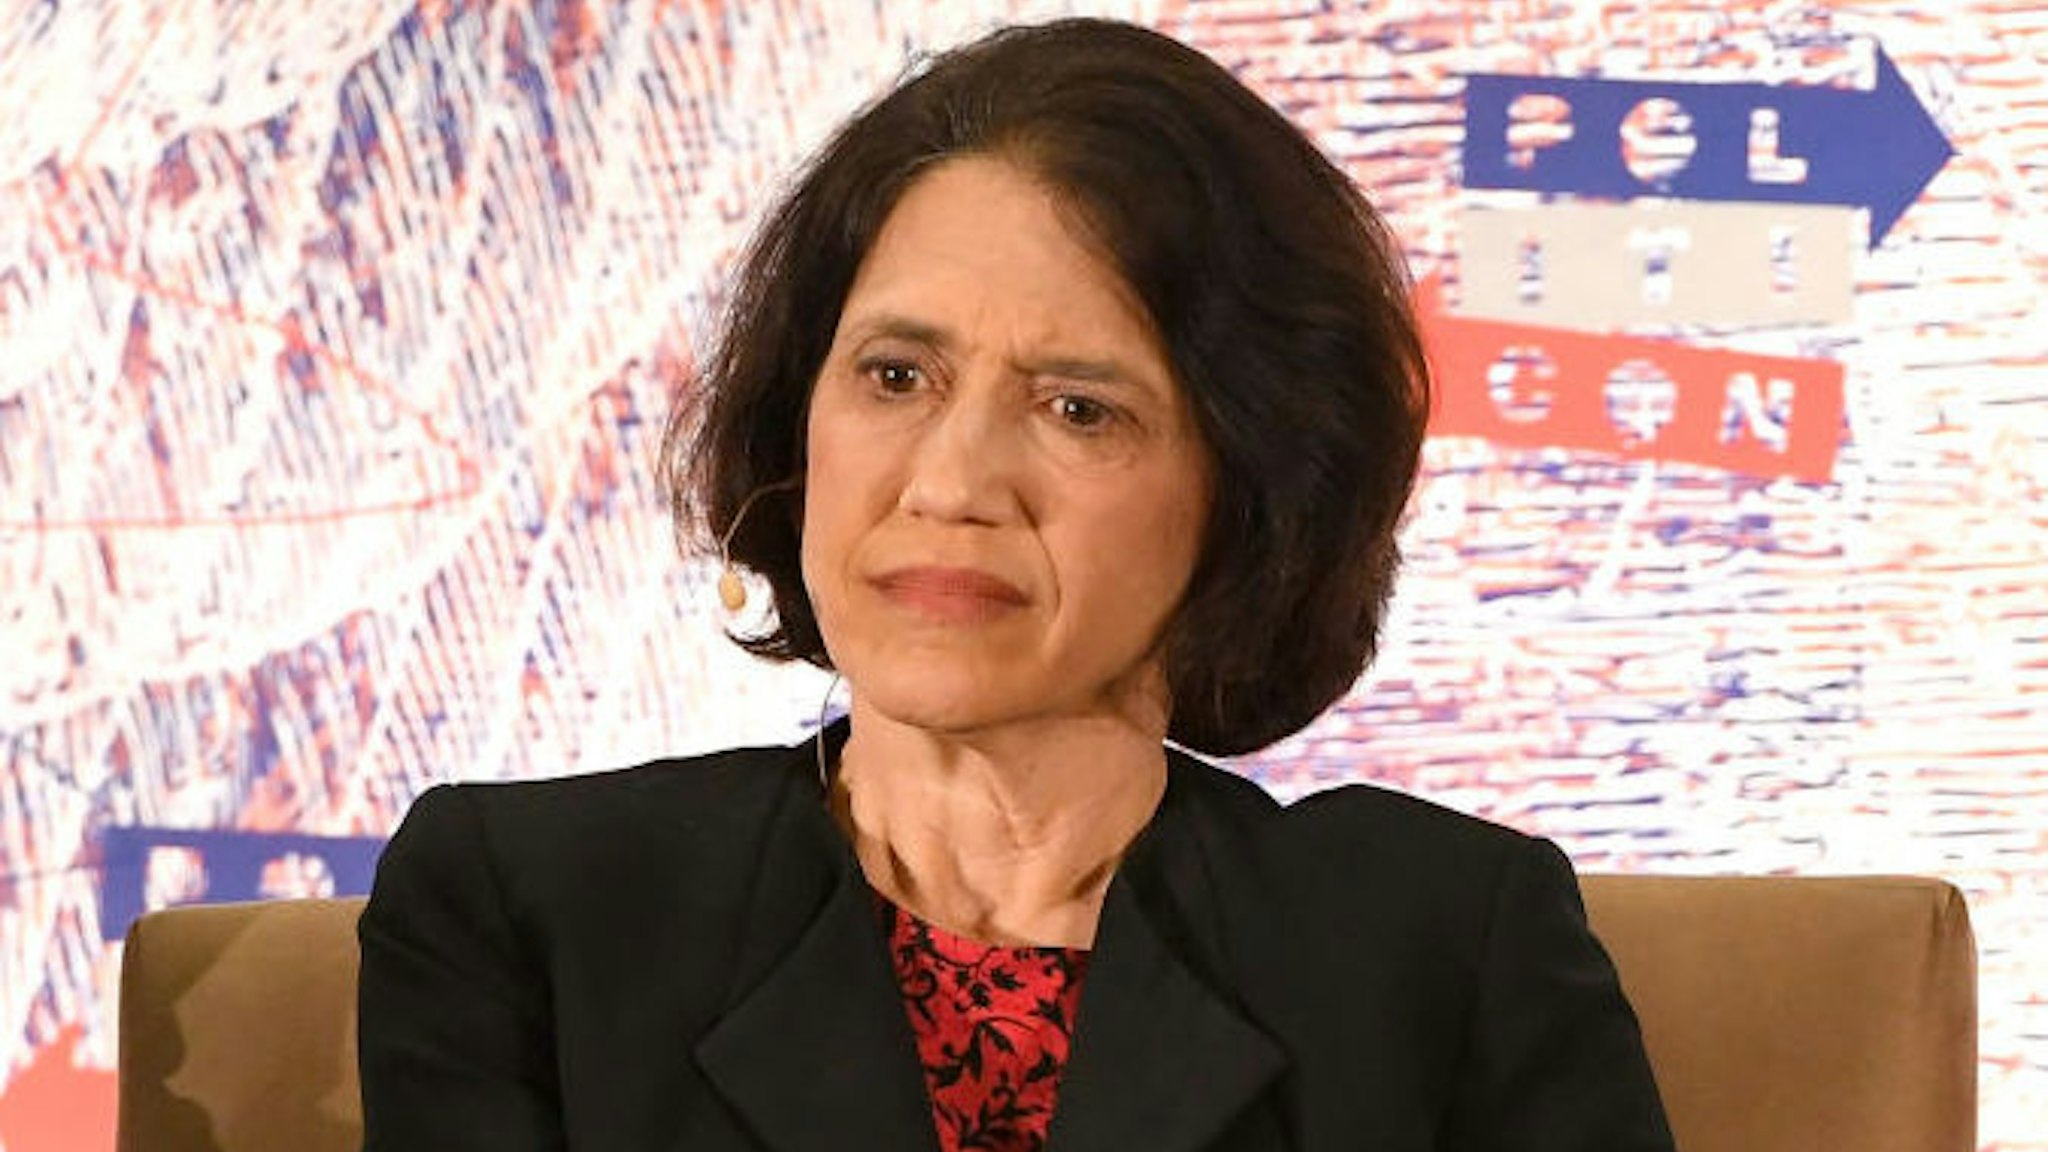 Jennifer Rubin onstage at Politicon 2018 at Los Angeles Convention Center on October 20, 2018 in Los Angeles, California.